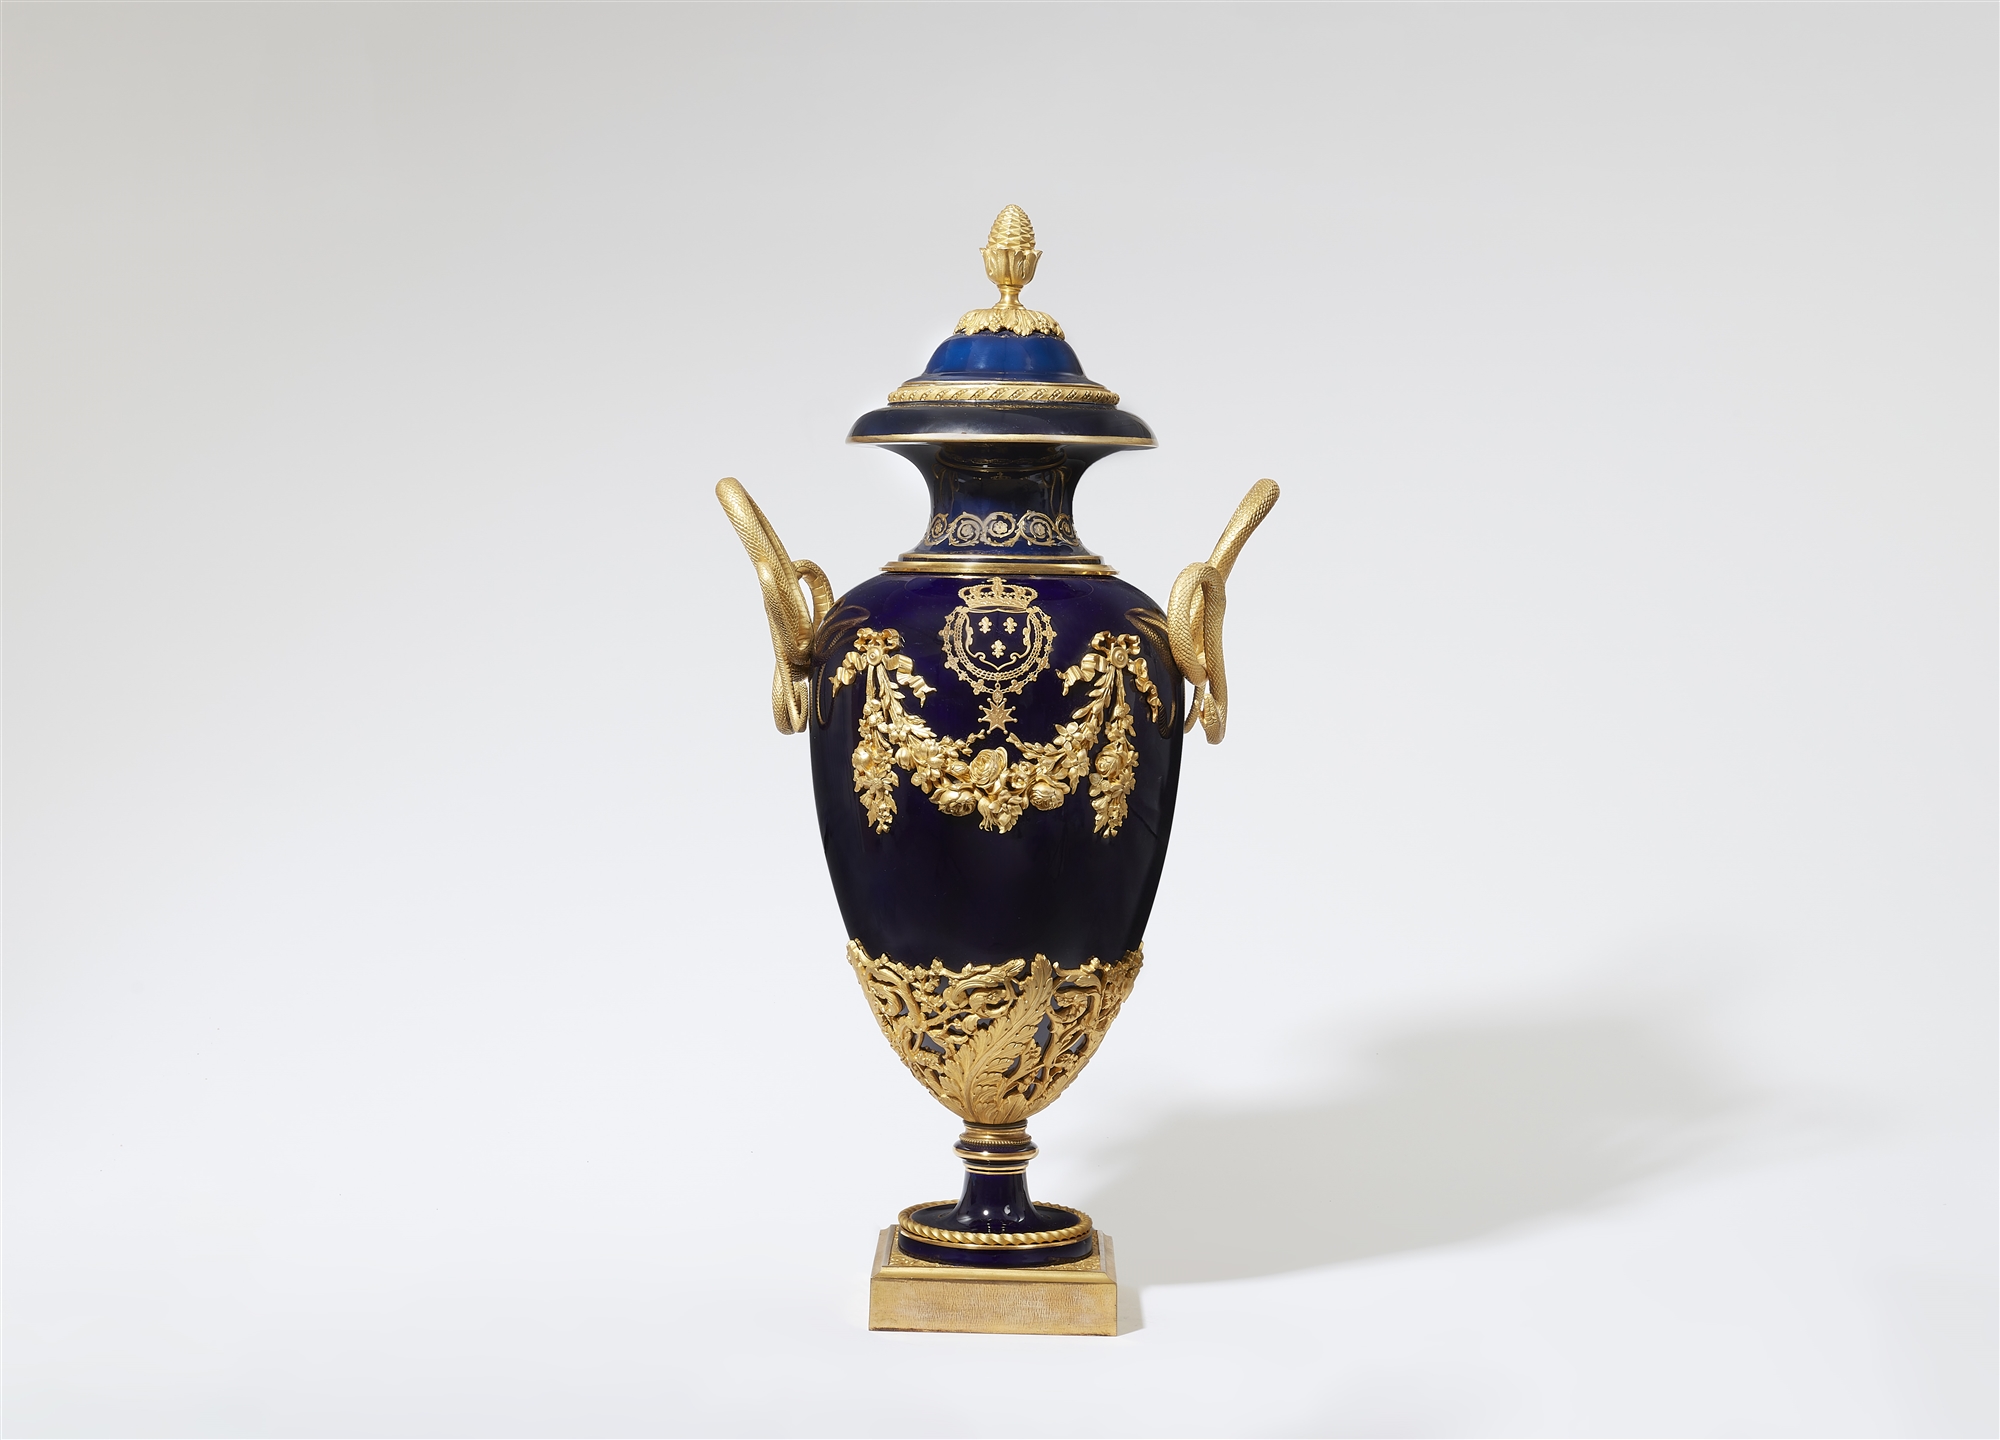 A magnificent heraldic porcelain vase in the manner of Sèvres - Image 2 of 2